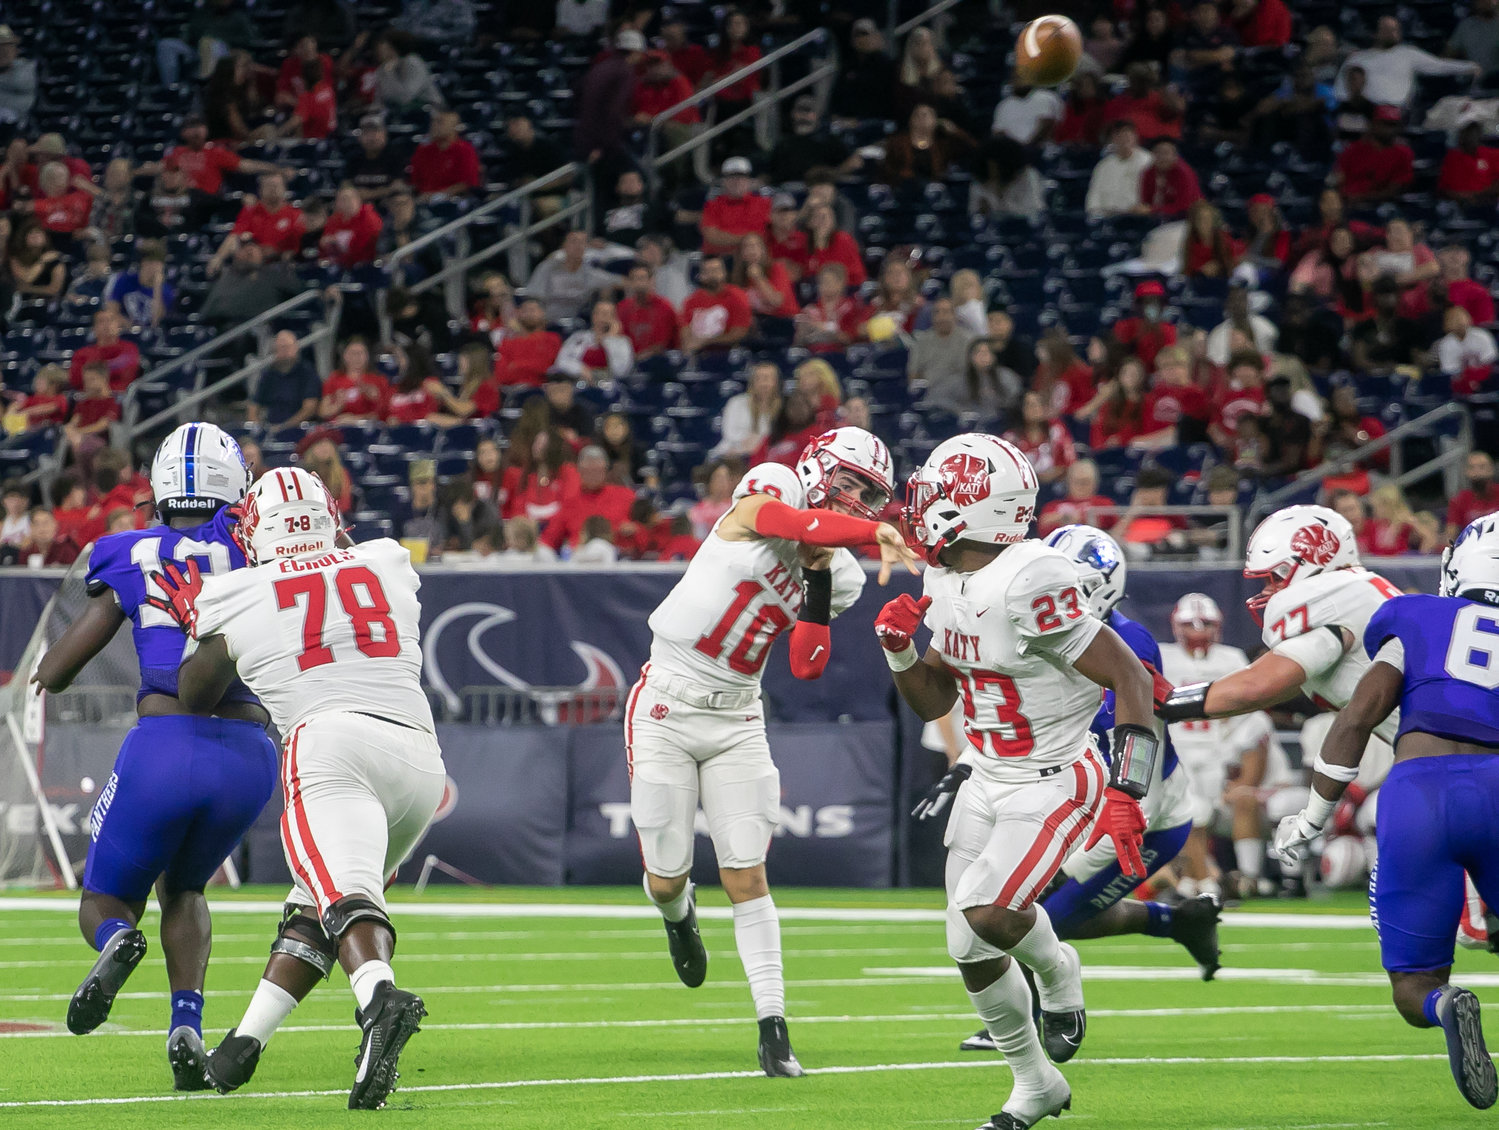 Caleb Koger throws a pass during Friday's Class 6A-Division II Region III Final between Katy and C.E. King at NRG Stadium.